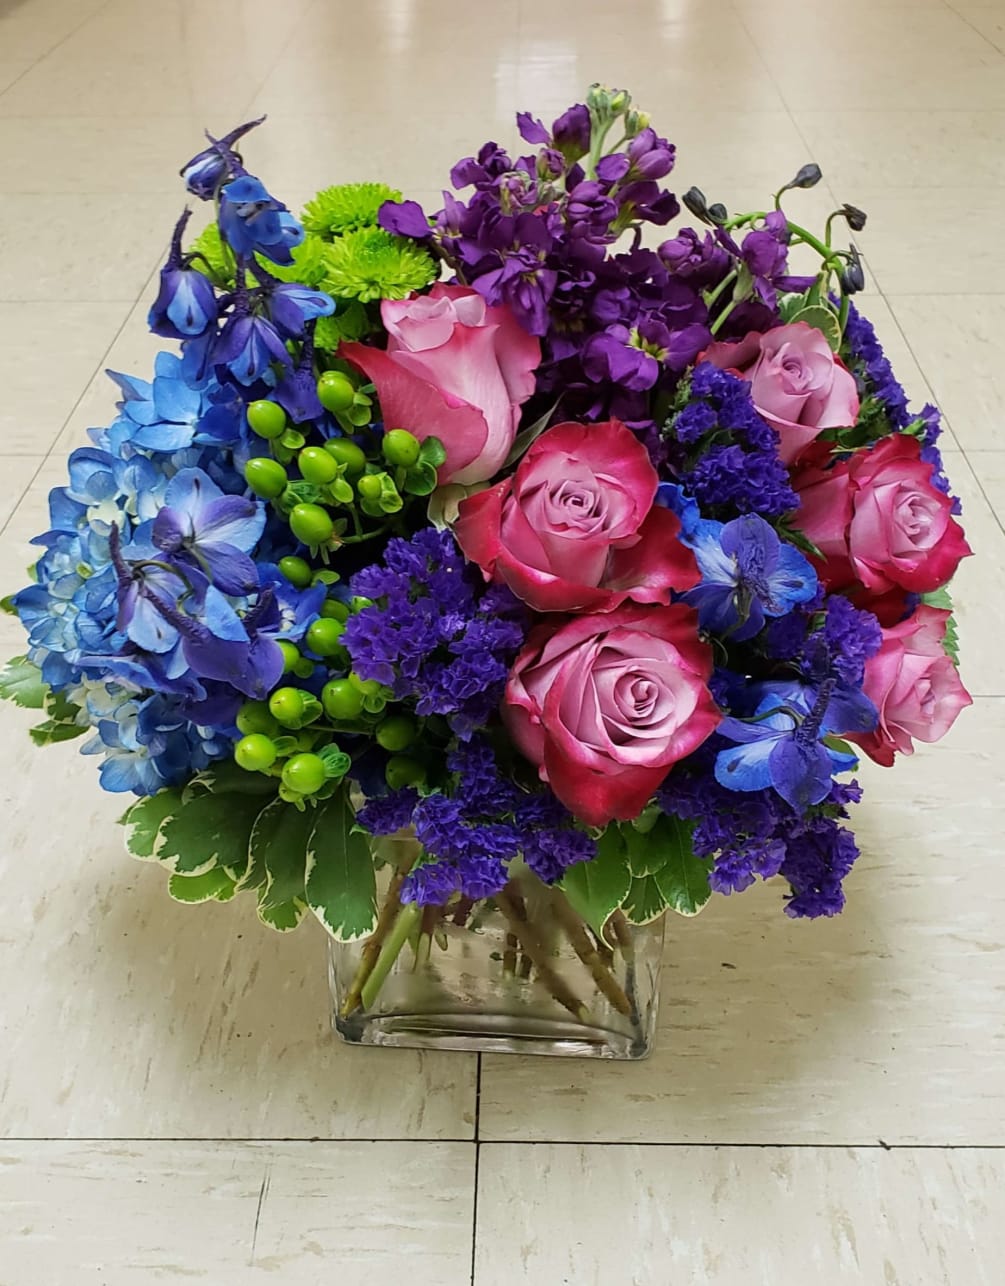 MONETS GARDEN CENTERPIECE BY TWIN TOWERS FLORIST Signature Classics Collection. Exclusive designs